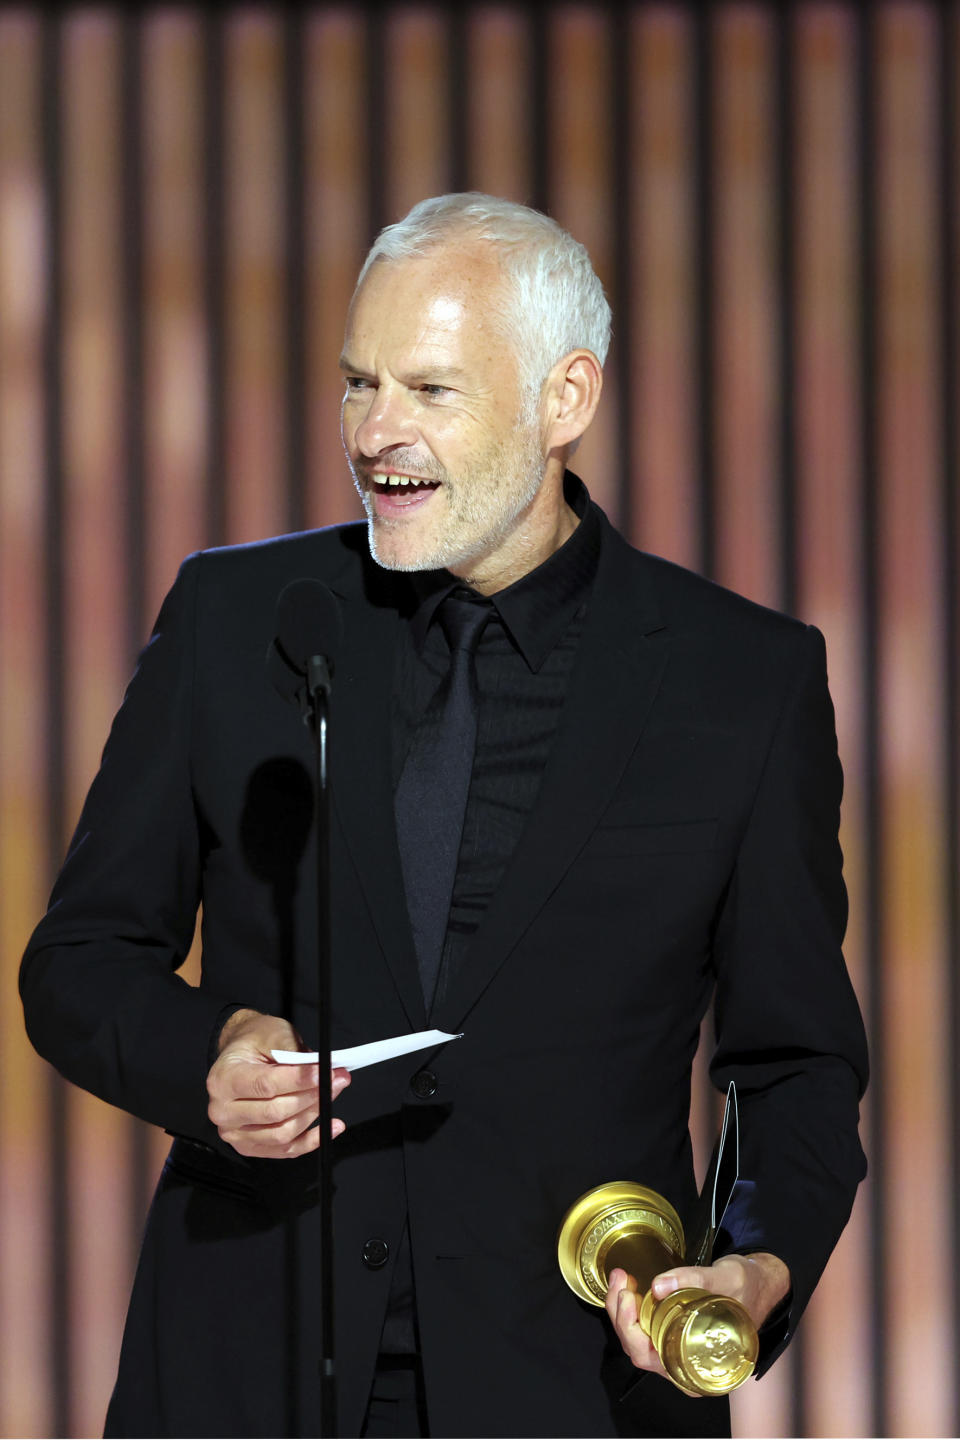 This image released by NBC shows Martin McDonagh accepting the Best Screenplay award for "The Banshees of Inisherin" during the 80th Annual Golden Globe Awards at the Beverly Hilton Hotel on Tuesday, Jan. 10, 2023, in Beverly Hills, Calif. (Rich Polk/NBC via AP)